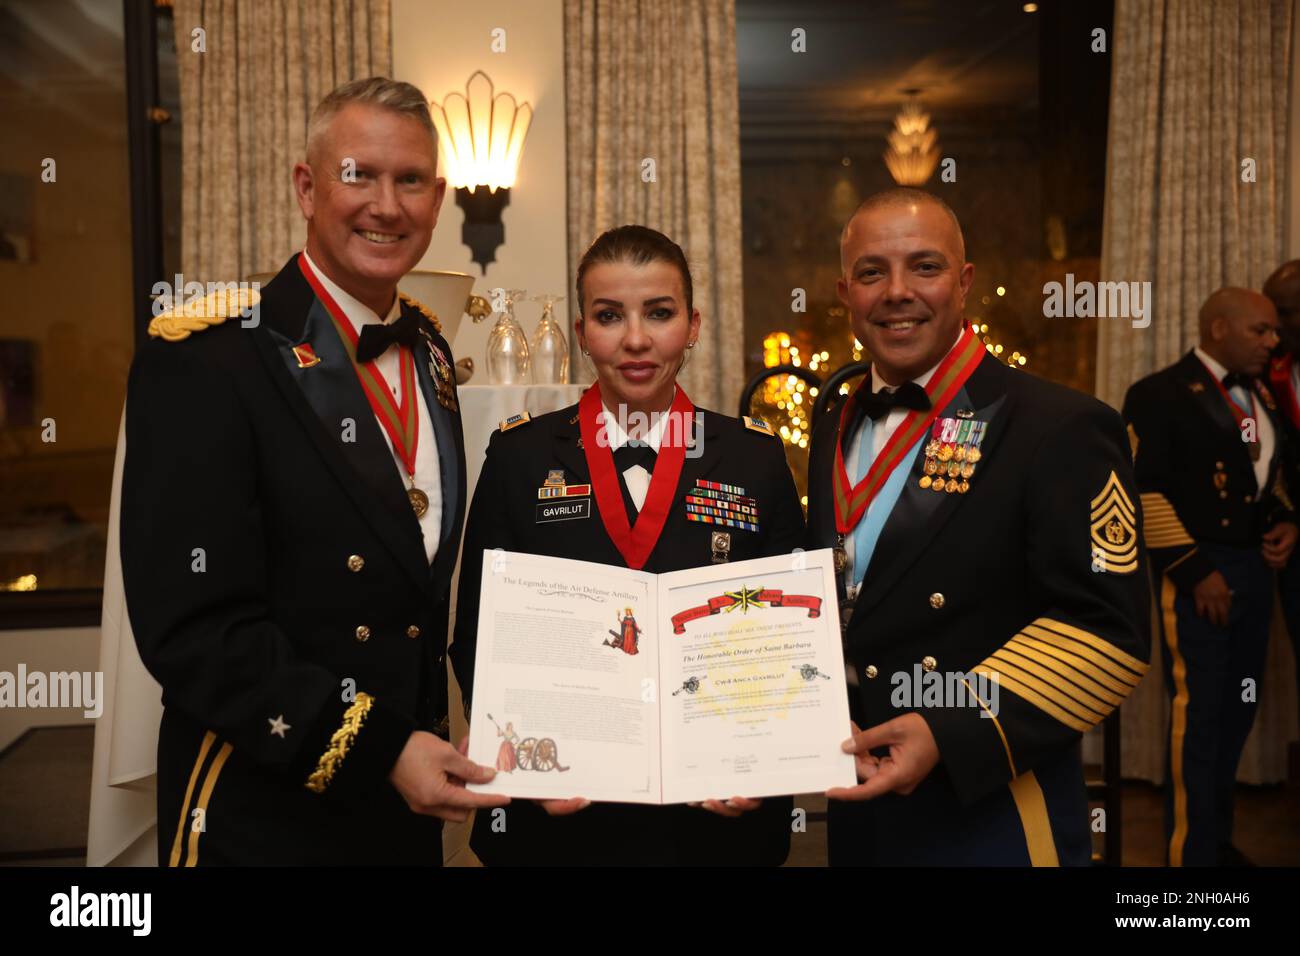 Warrant Officer 4 Anca Gavrilut, G2, 32d AAMDC, was inducted into the Honorable Order of Saint Barbara during the Saint Barbara's Social, December 3rd at the Plaza Hotel in El Paso, Texas  The Honorable Order of Saint Barbara is awarded to personnel who have served honorably and with distinction as a member of the Artillery or part of an Artillery unit. Stock Photo